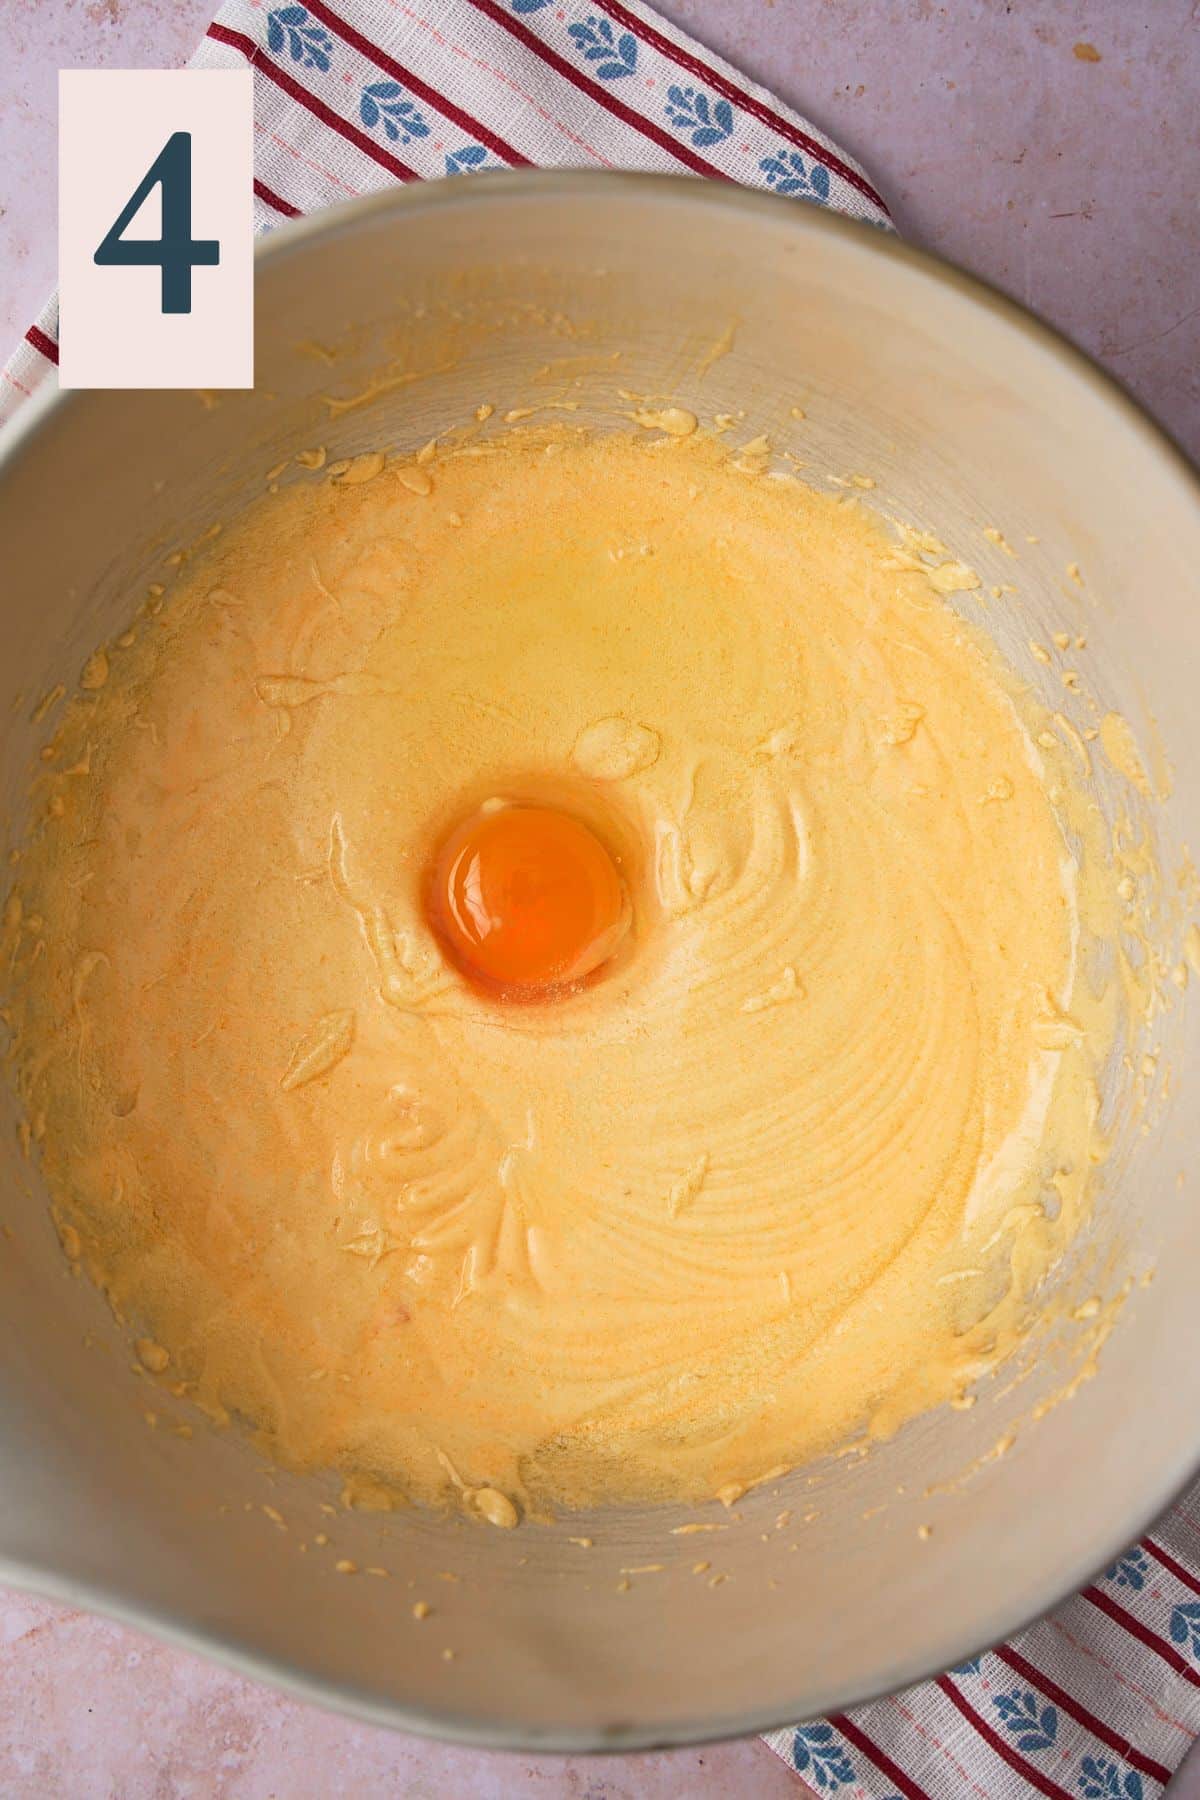 Smooth and emulsified egg mixture in a large bowl with one whole egg added. 